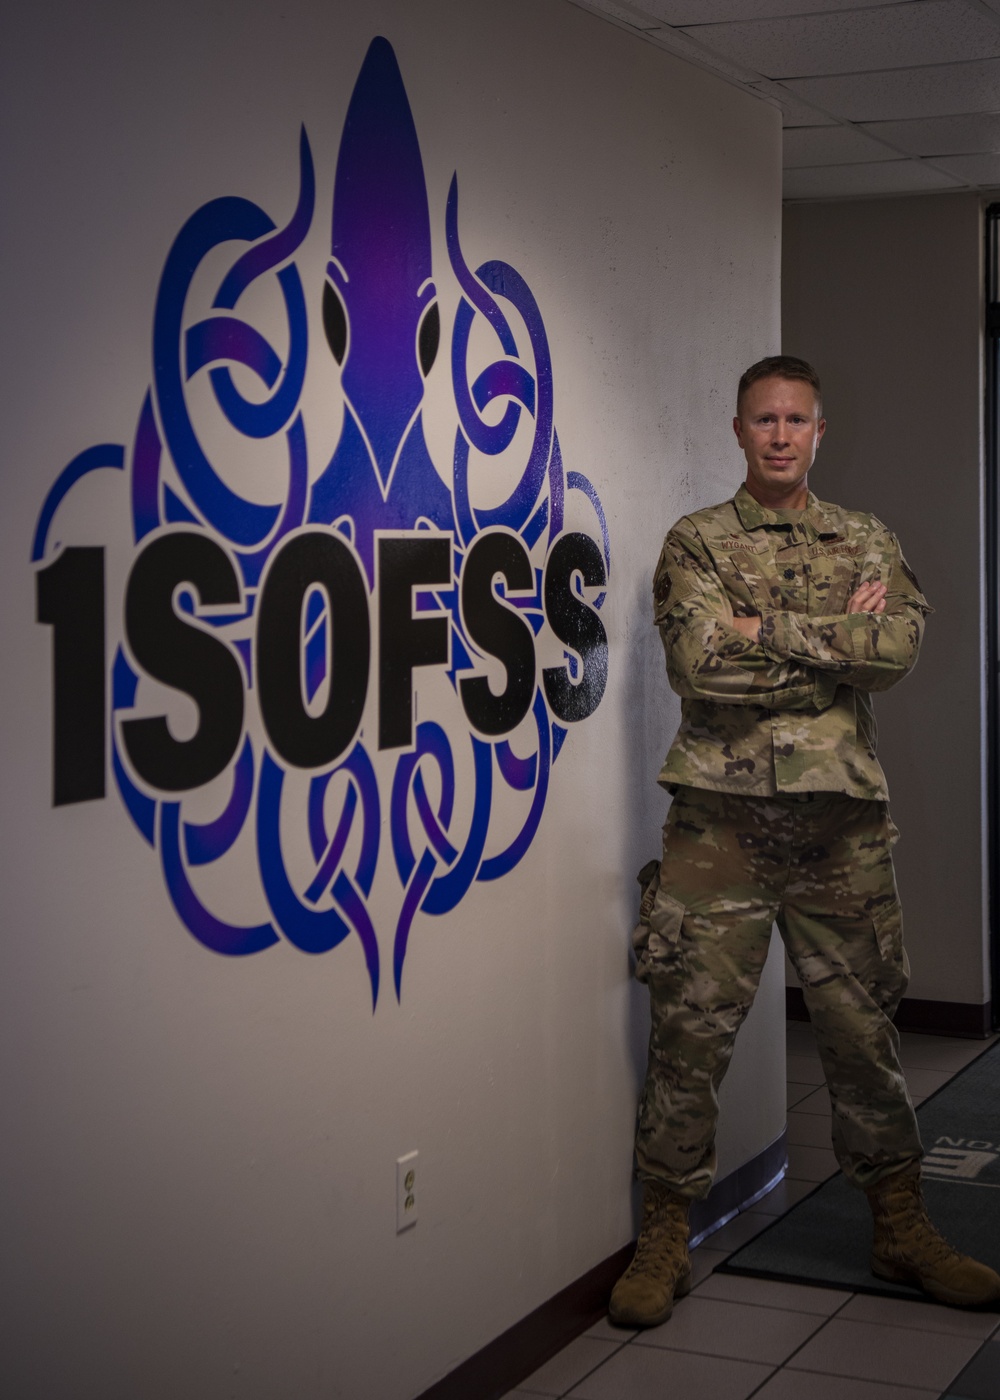 Lt. Col. Jacob Wygant takes command of the 1st Special Operations Force Support Squadron